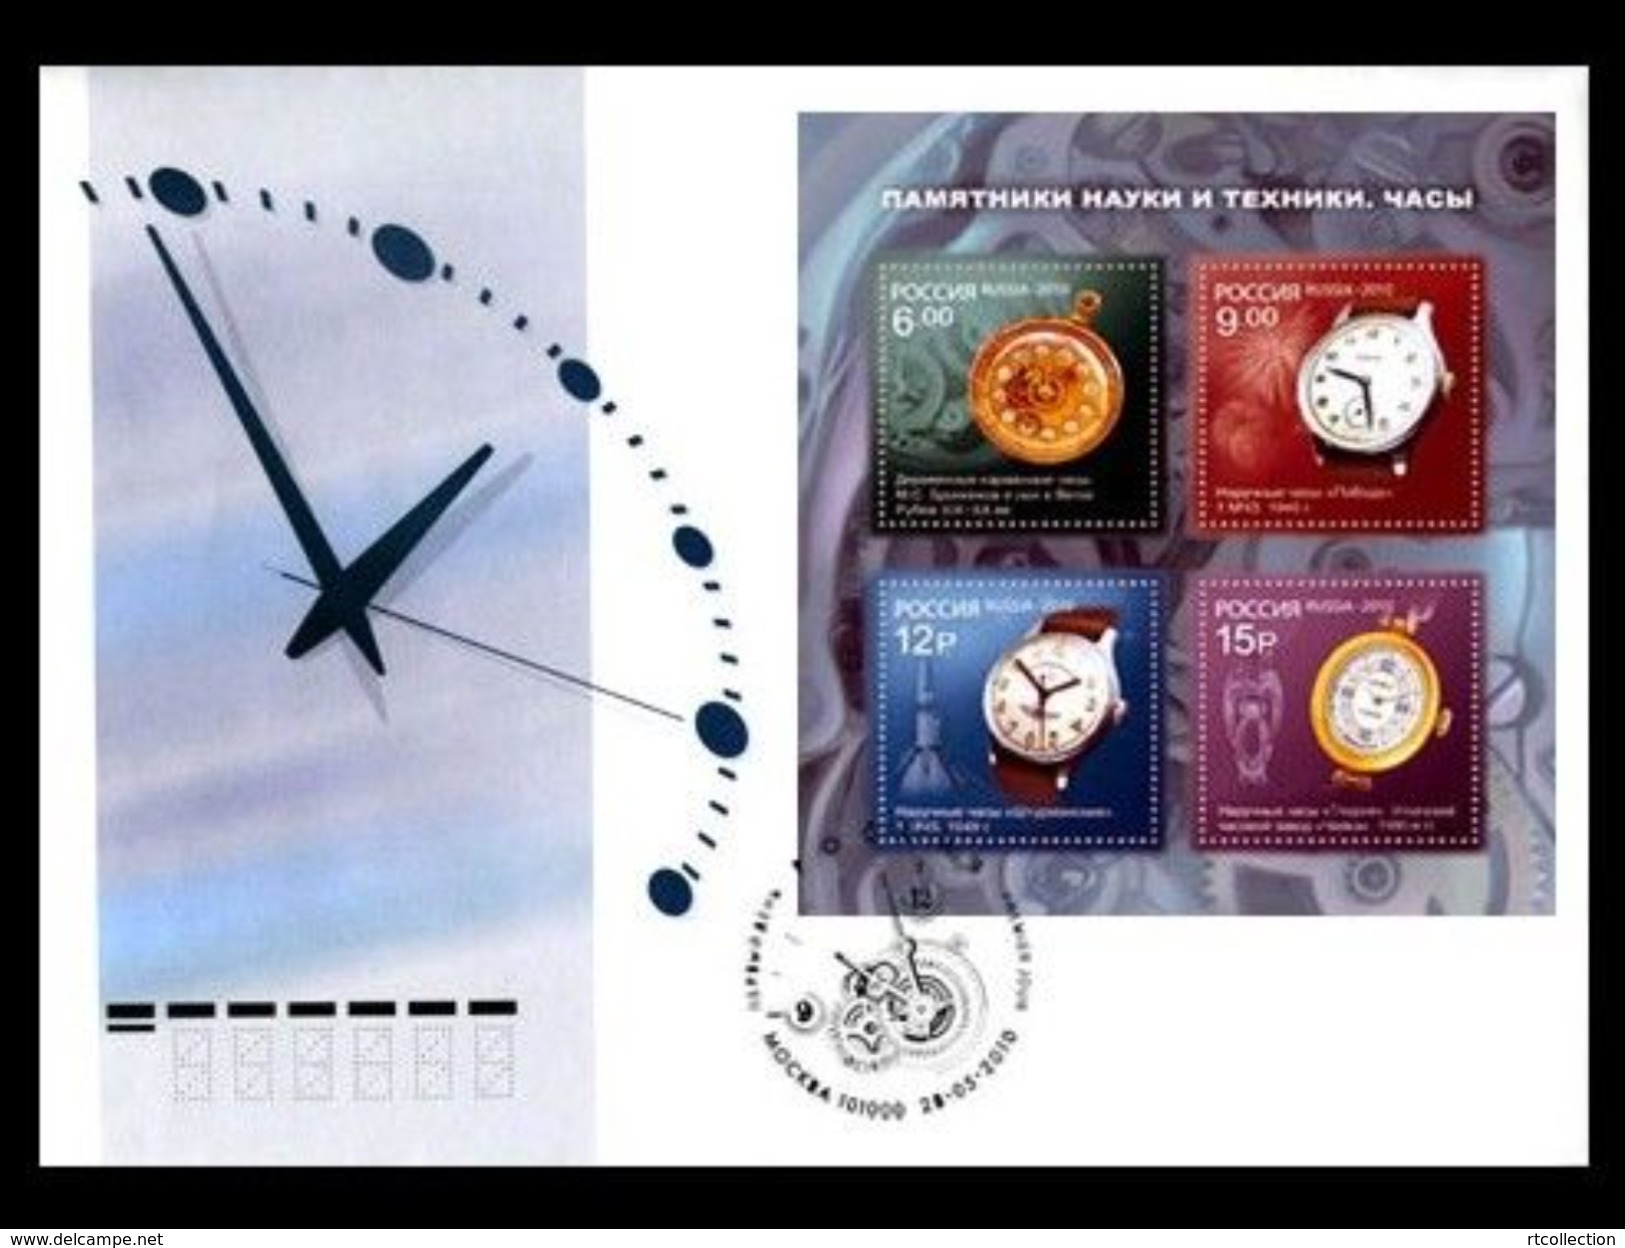 Russia 2010 Souvenir Pack FDC S/S Monuments Sciences Technology Watches Wrist Clock Artifact Stamps Michel BL134 SC 7216 - Collections